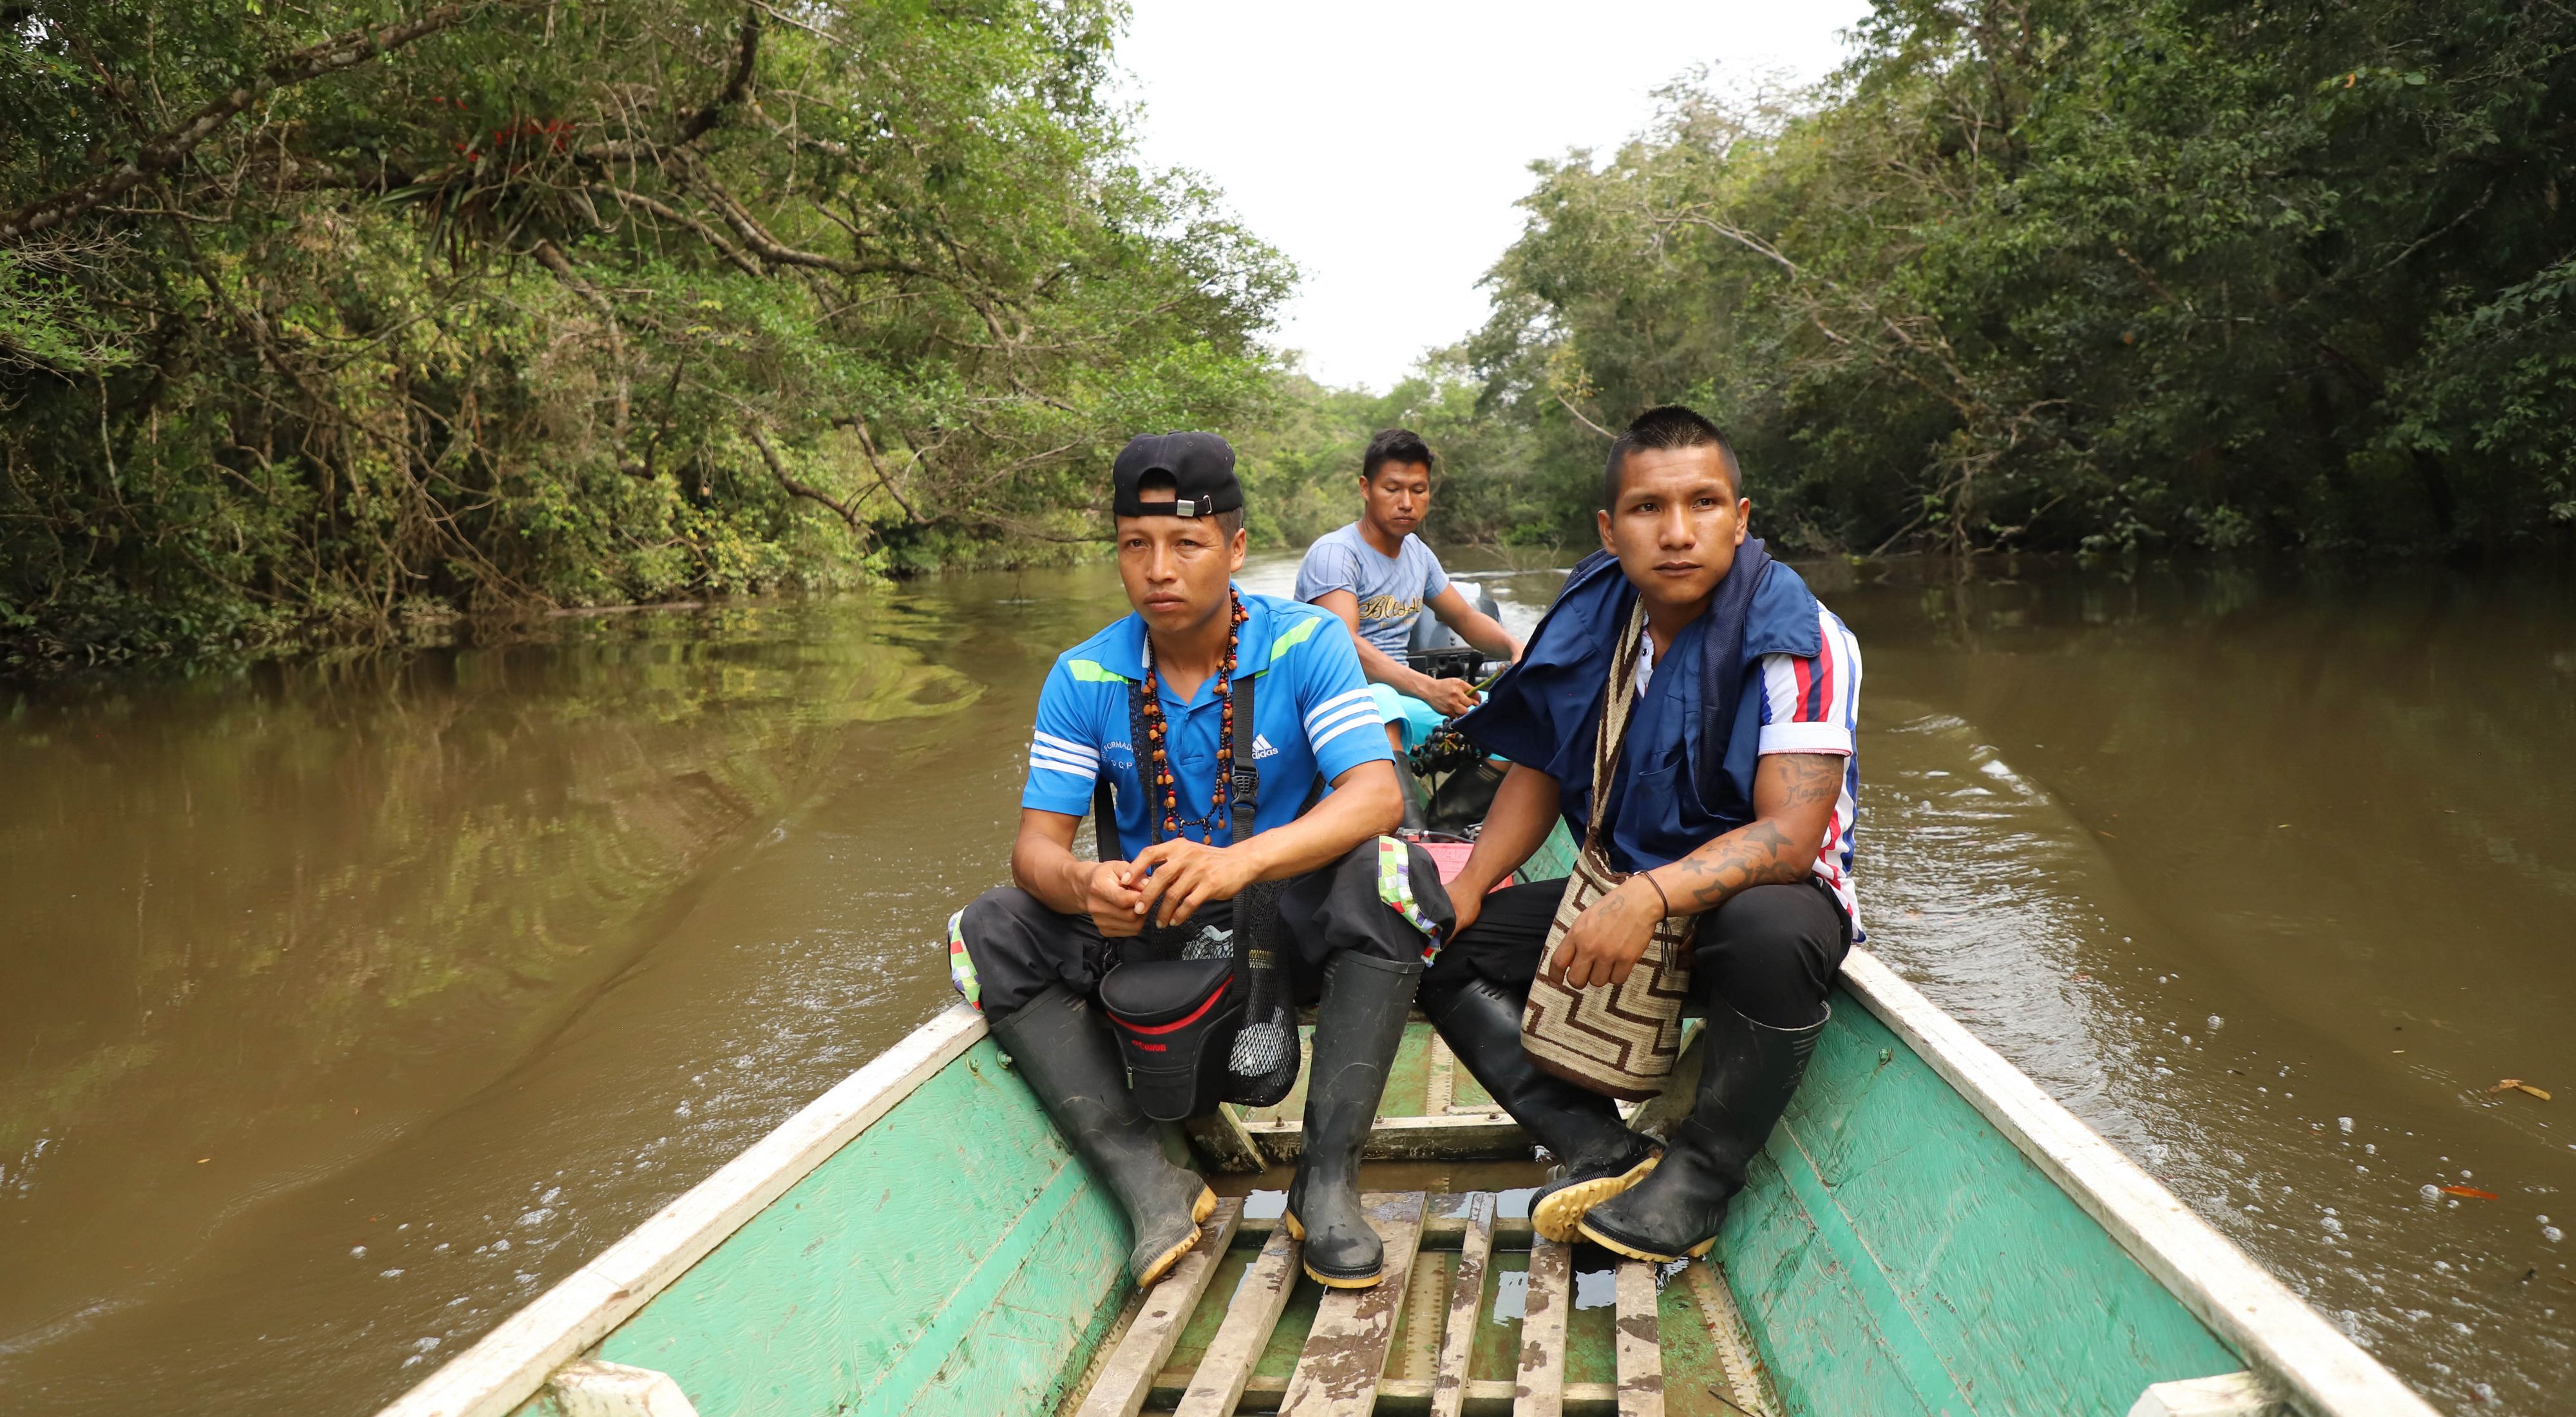 Three men from an Indigenous community in the Amazon rainforest are in the stern of a boat, travelling upriver.